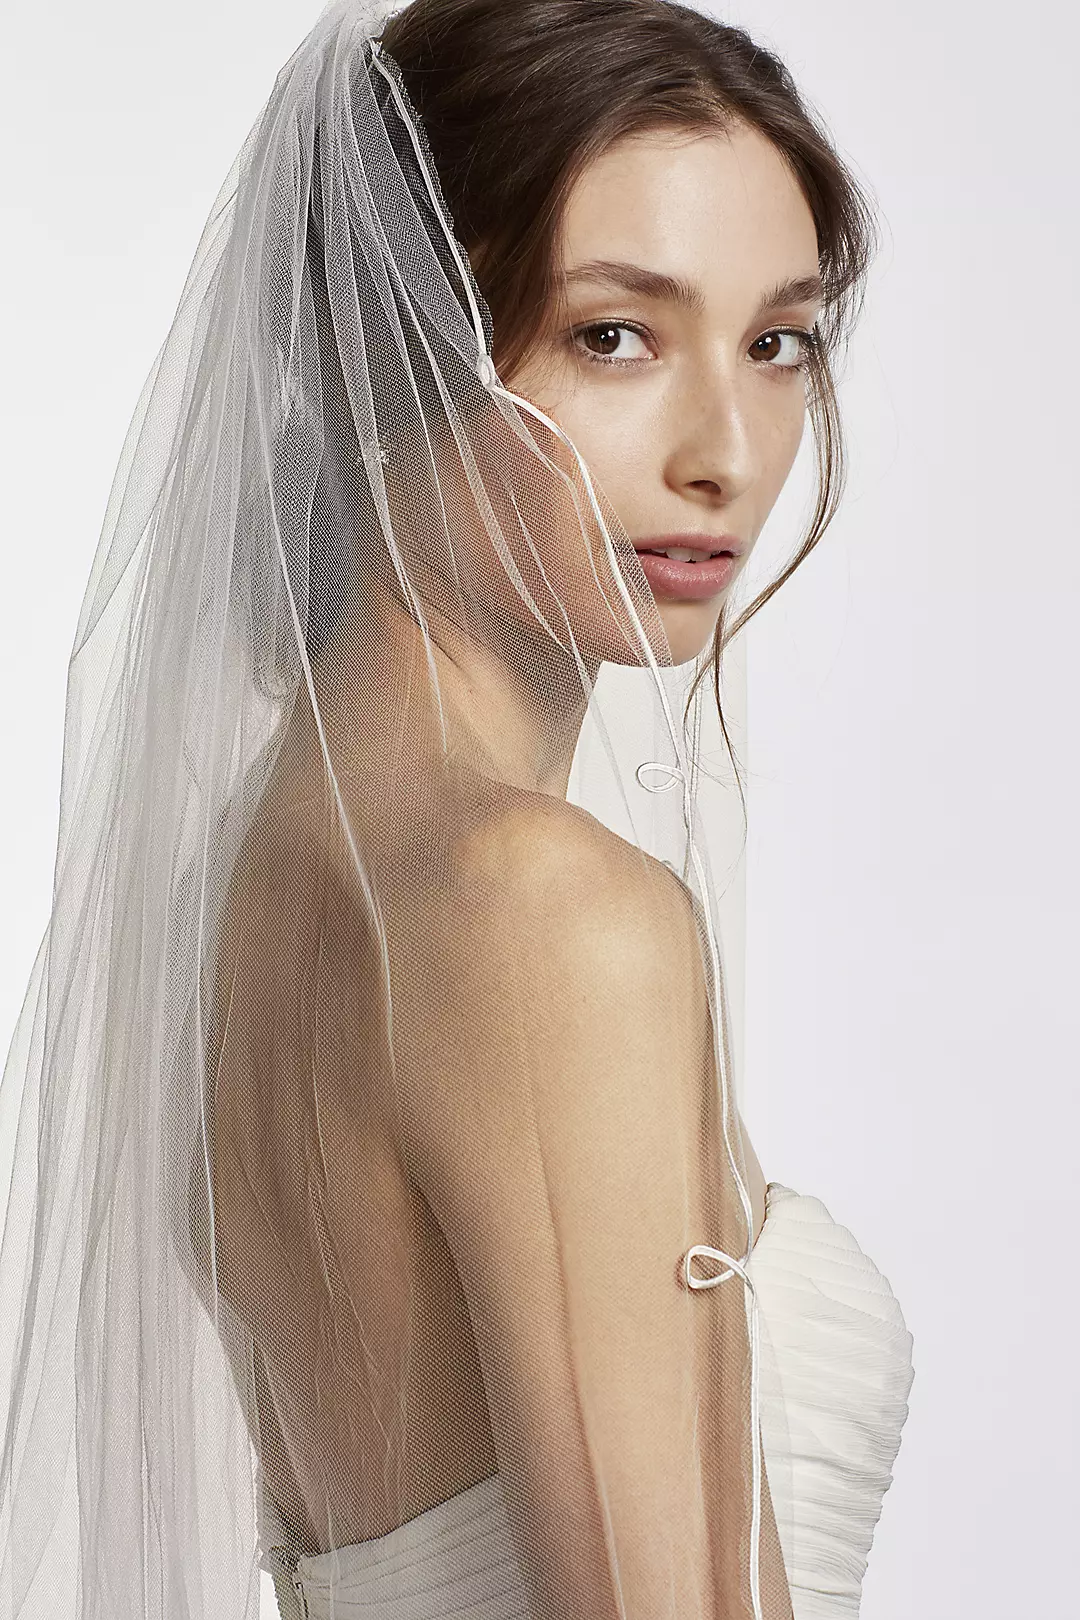 One tier Cathedral Veil with Simple Scroll Edge Image 2